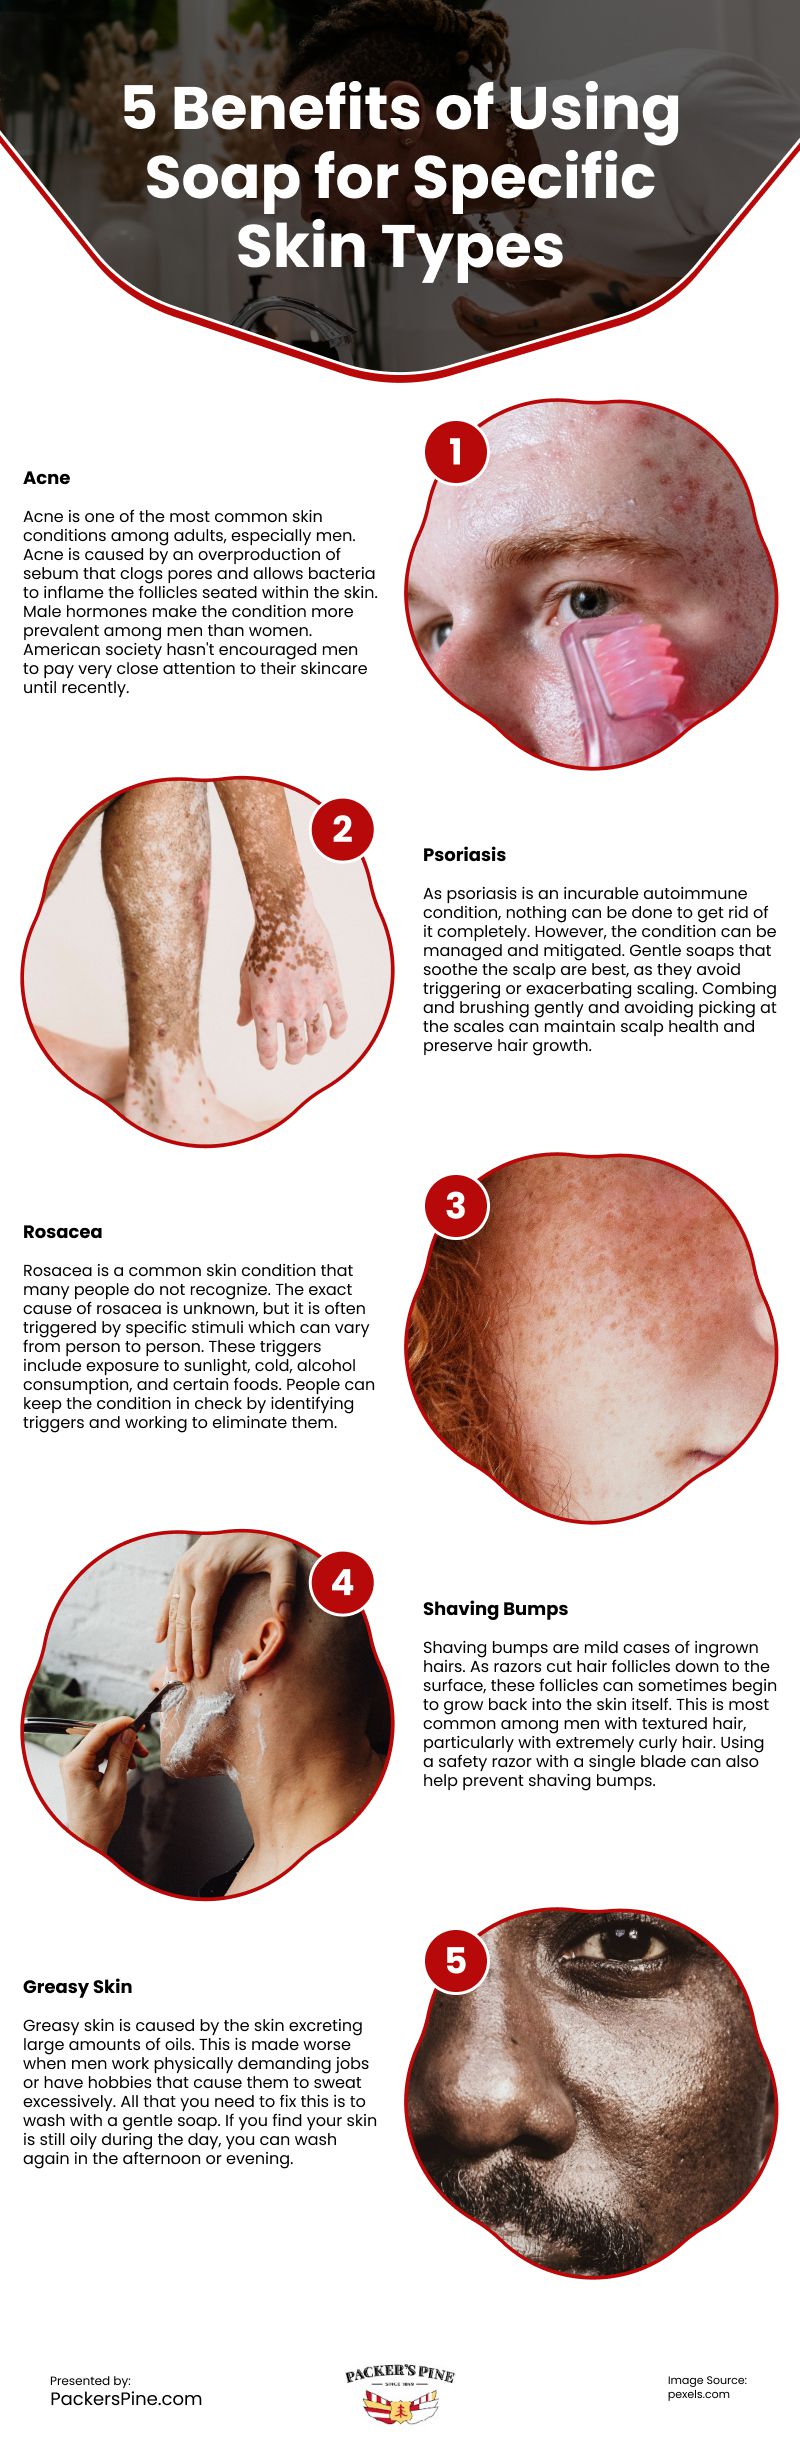 5 Benefits of Using Soap for Specific Skin Types Infographic